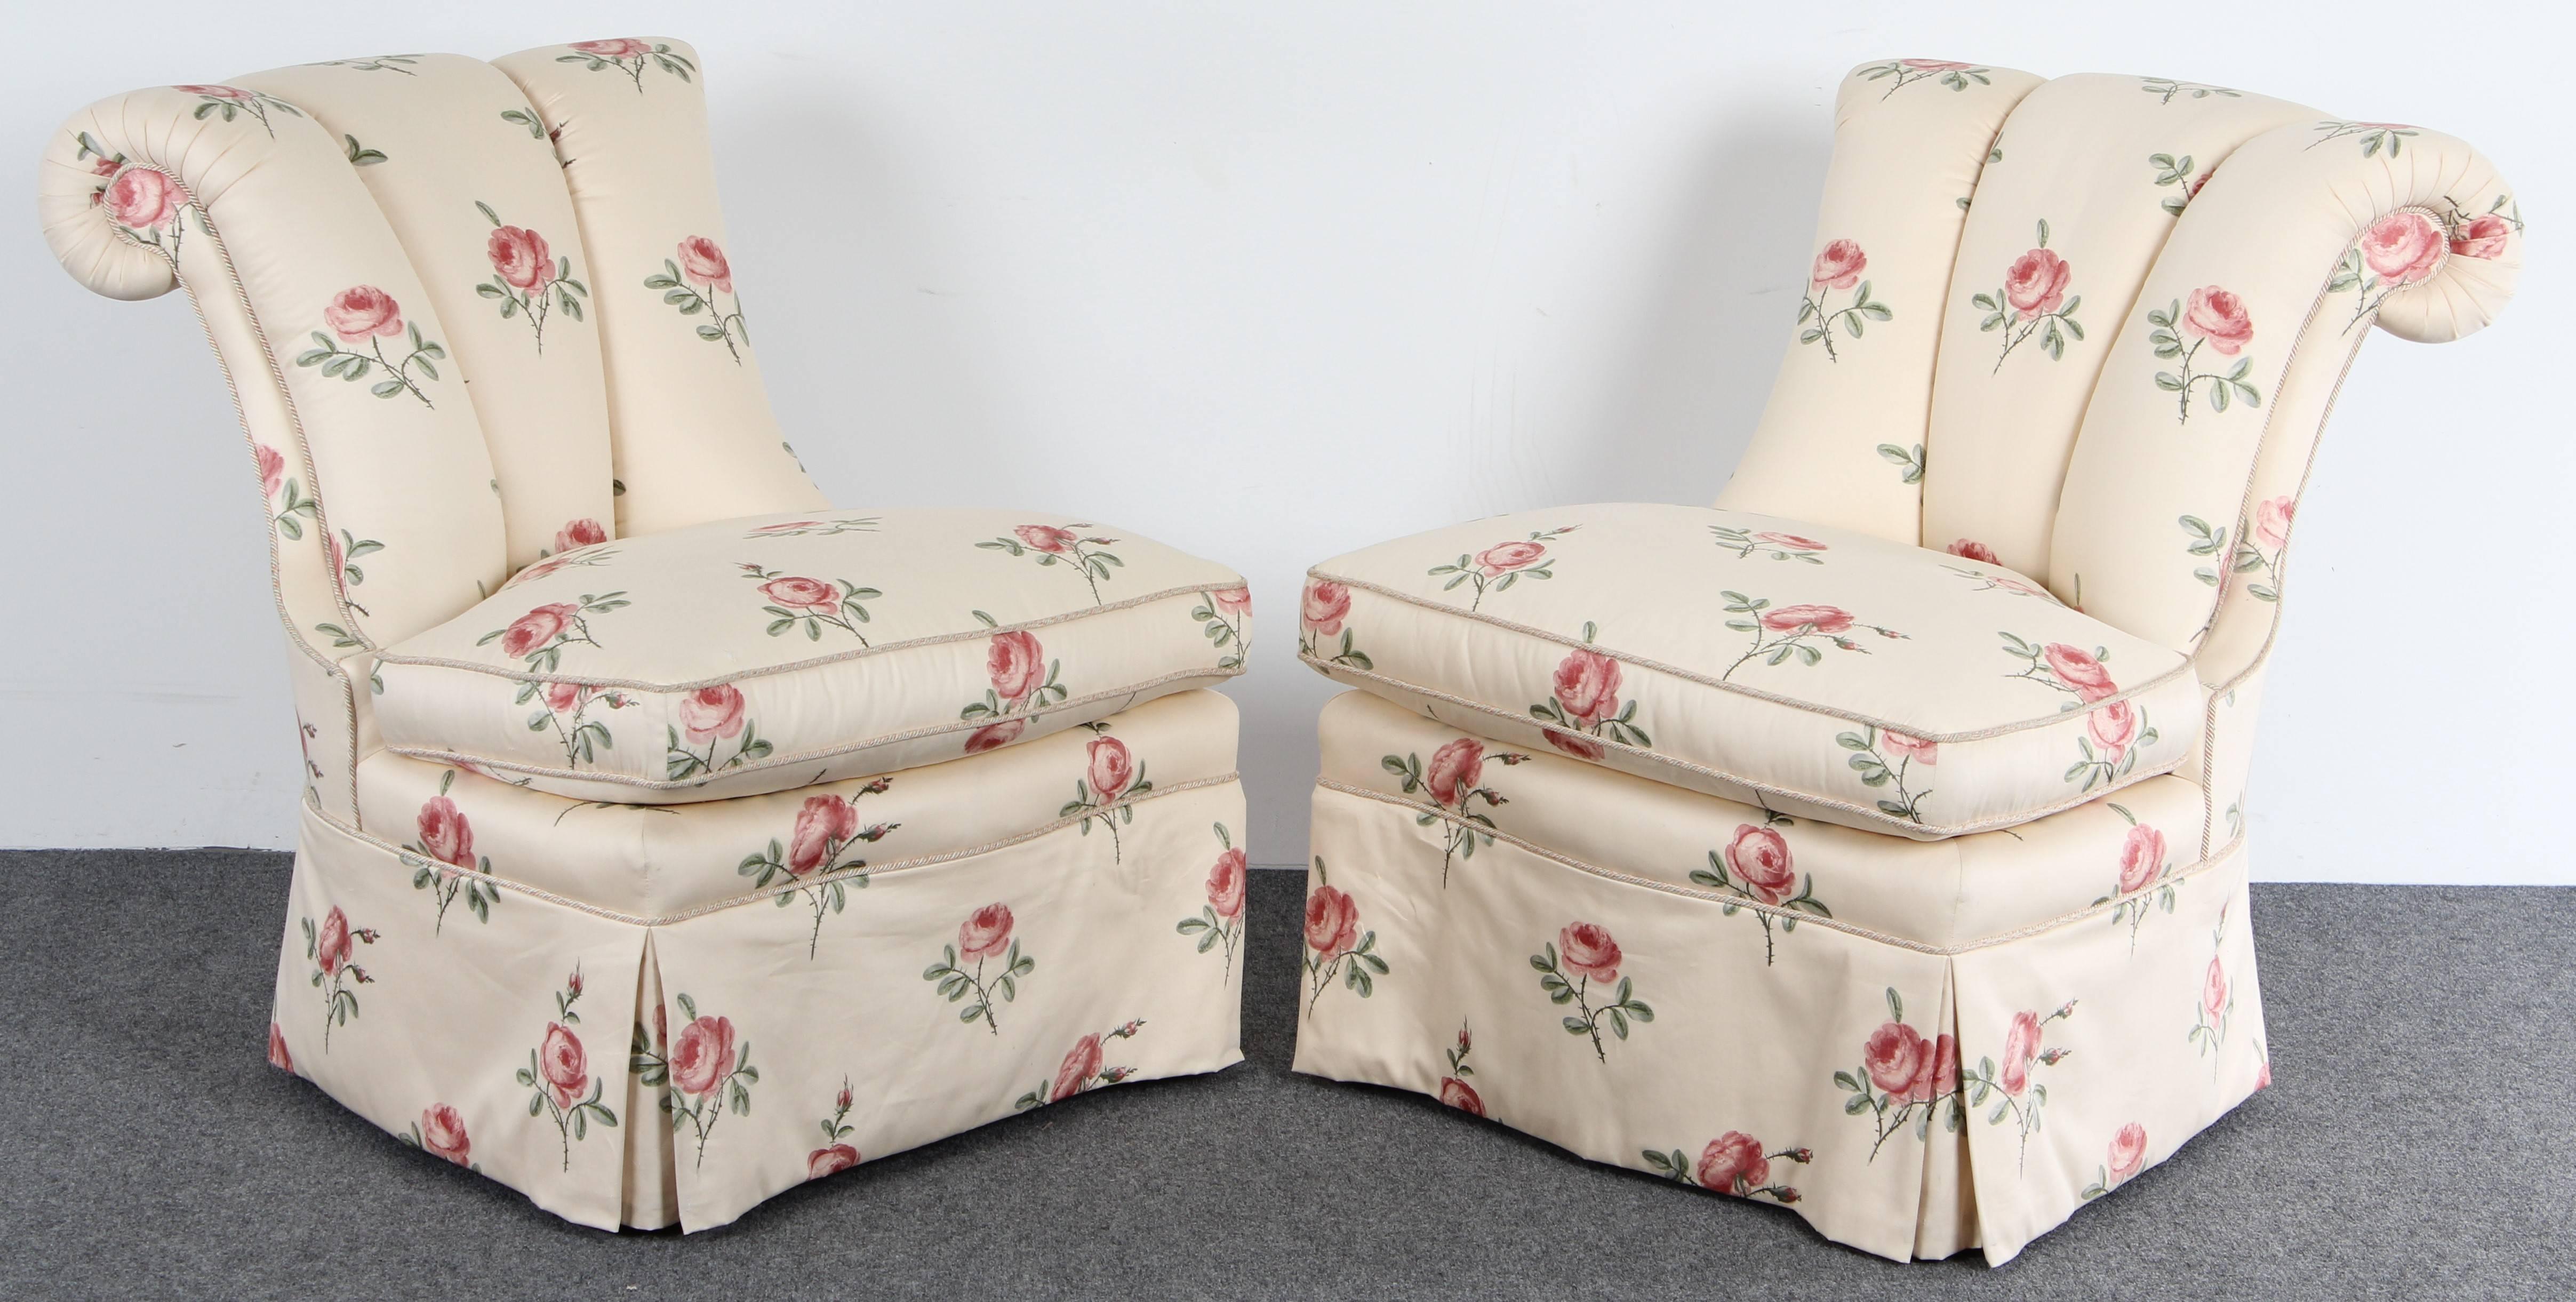 Pair of armless Napoleon III slipper chairs by Lewis Mittman, Inc. The high quality chairs have original floral chintz upholstery. These comfortable Hollywood Regency style chairs would look great in any modern or traditional home. They have great